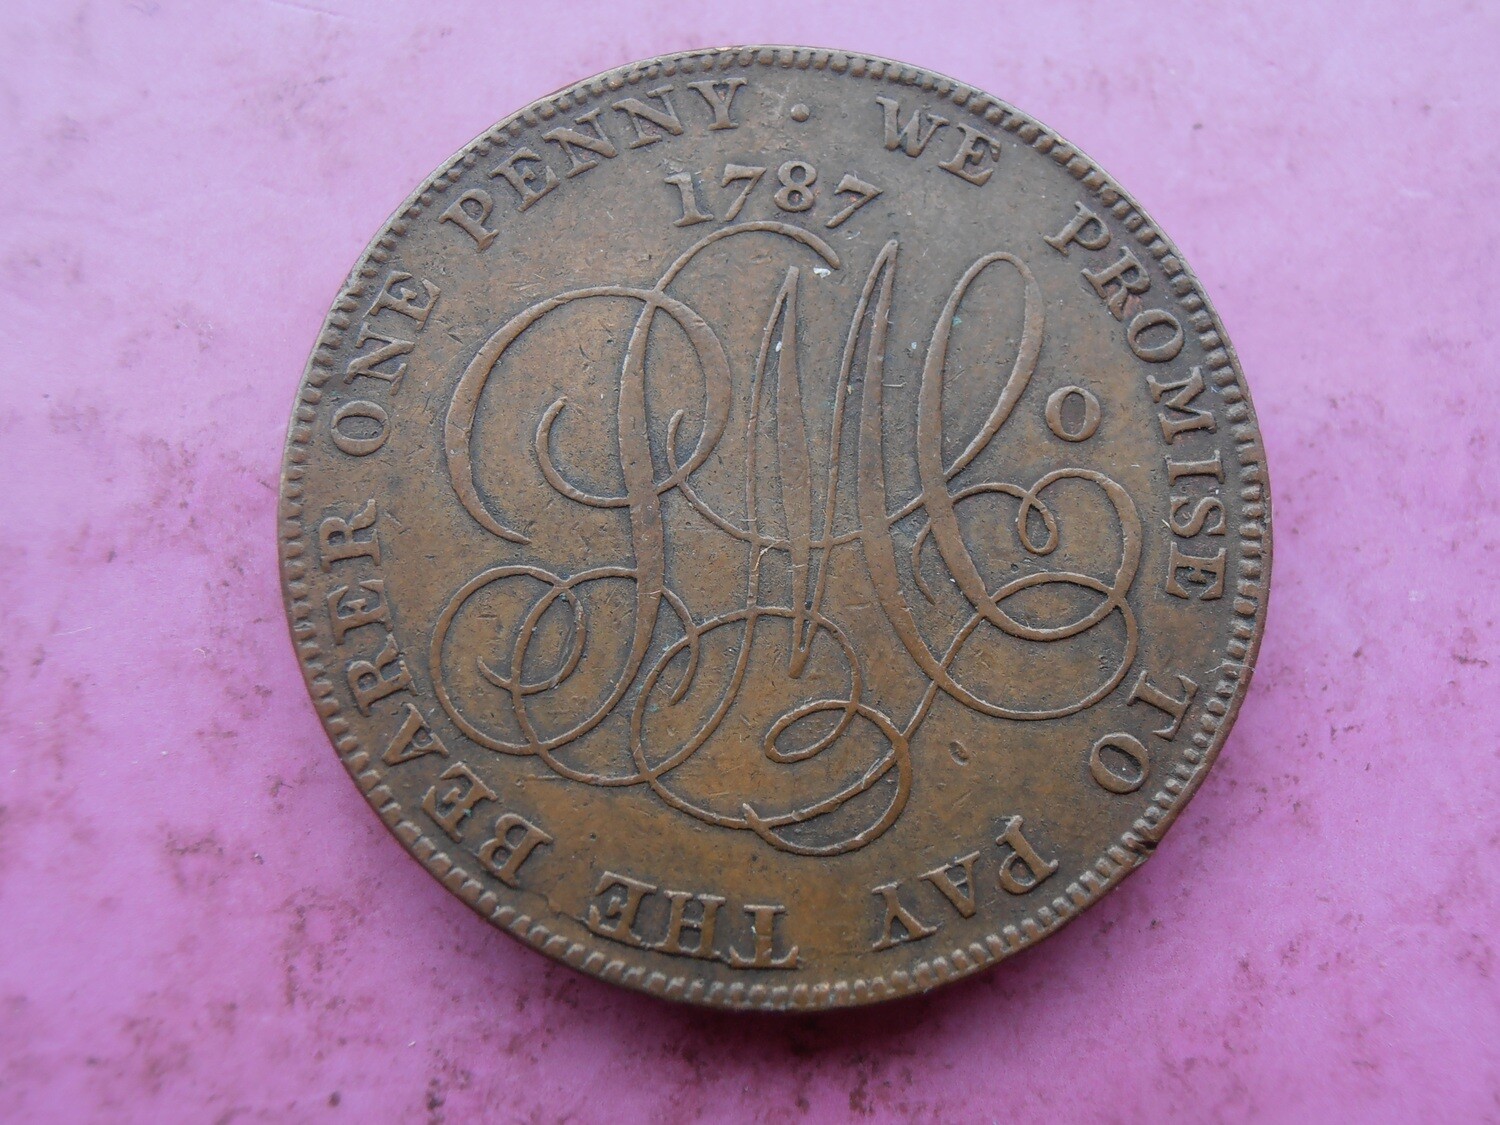 Anglesey Penny Token - 1787